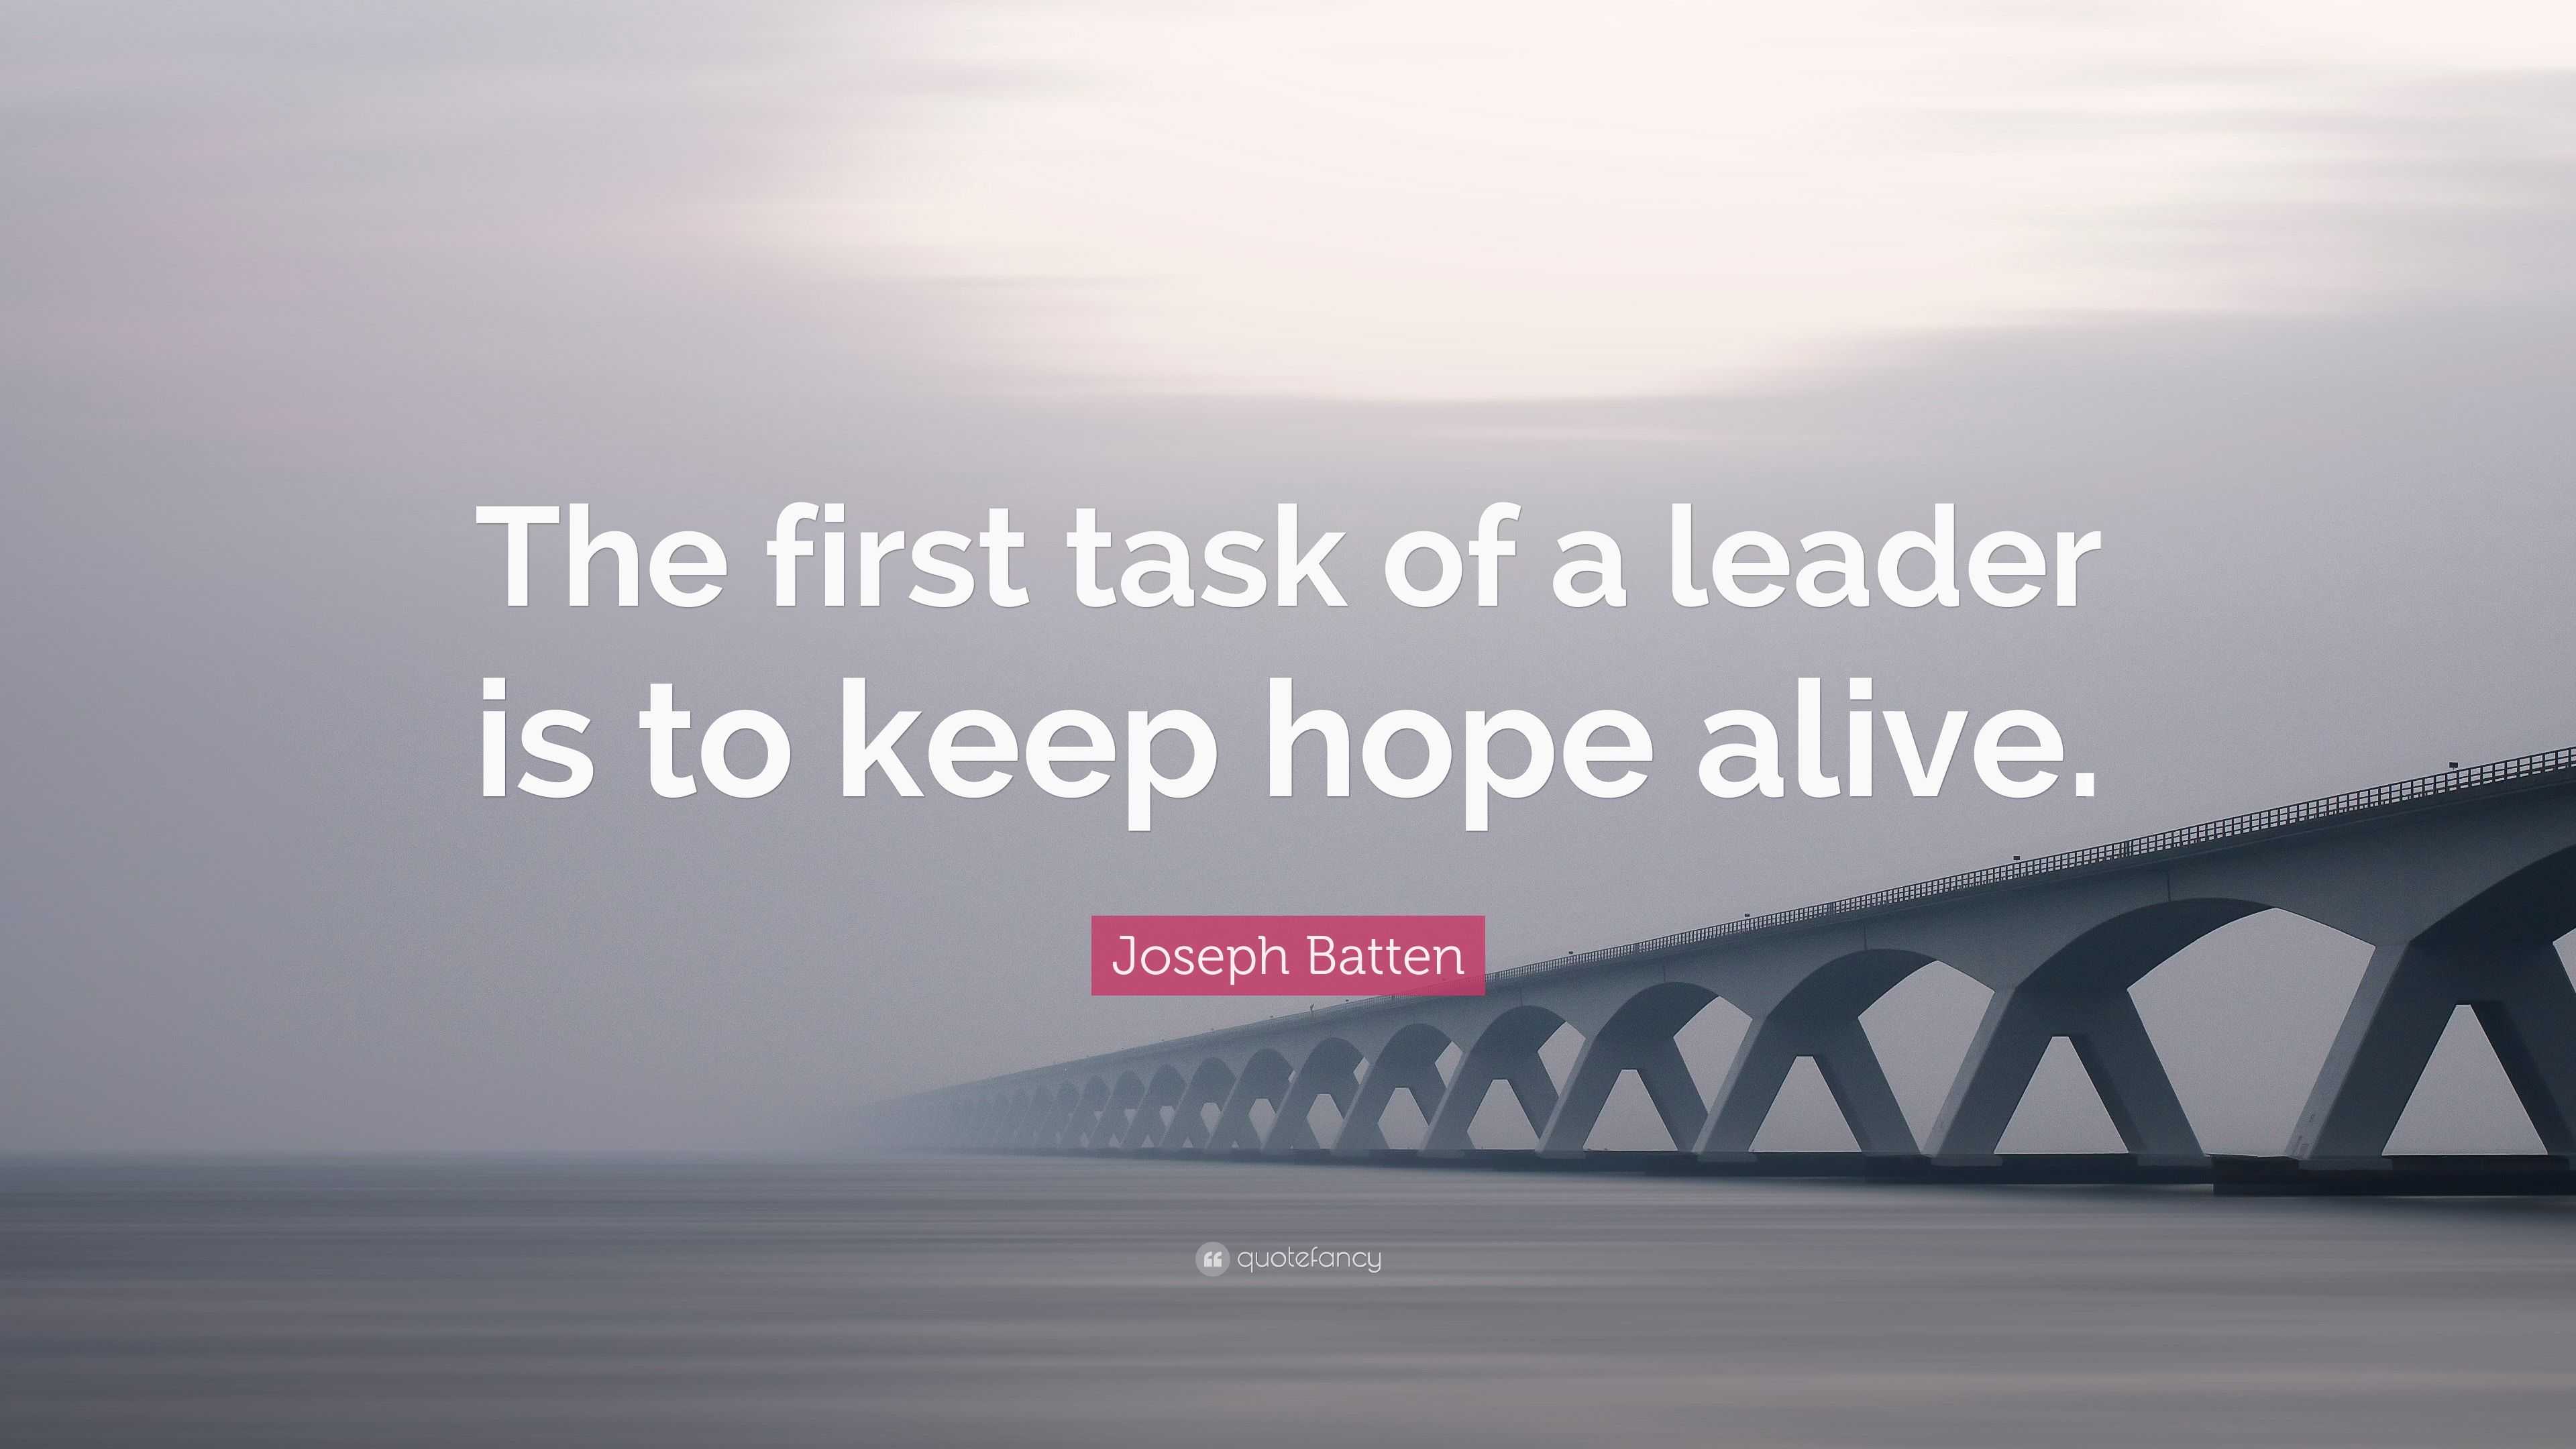 Joseph Batten Quote: "The first task of a leader is to keep hope alive." (7 wallpapers) - Quotefancy